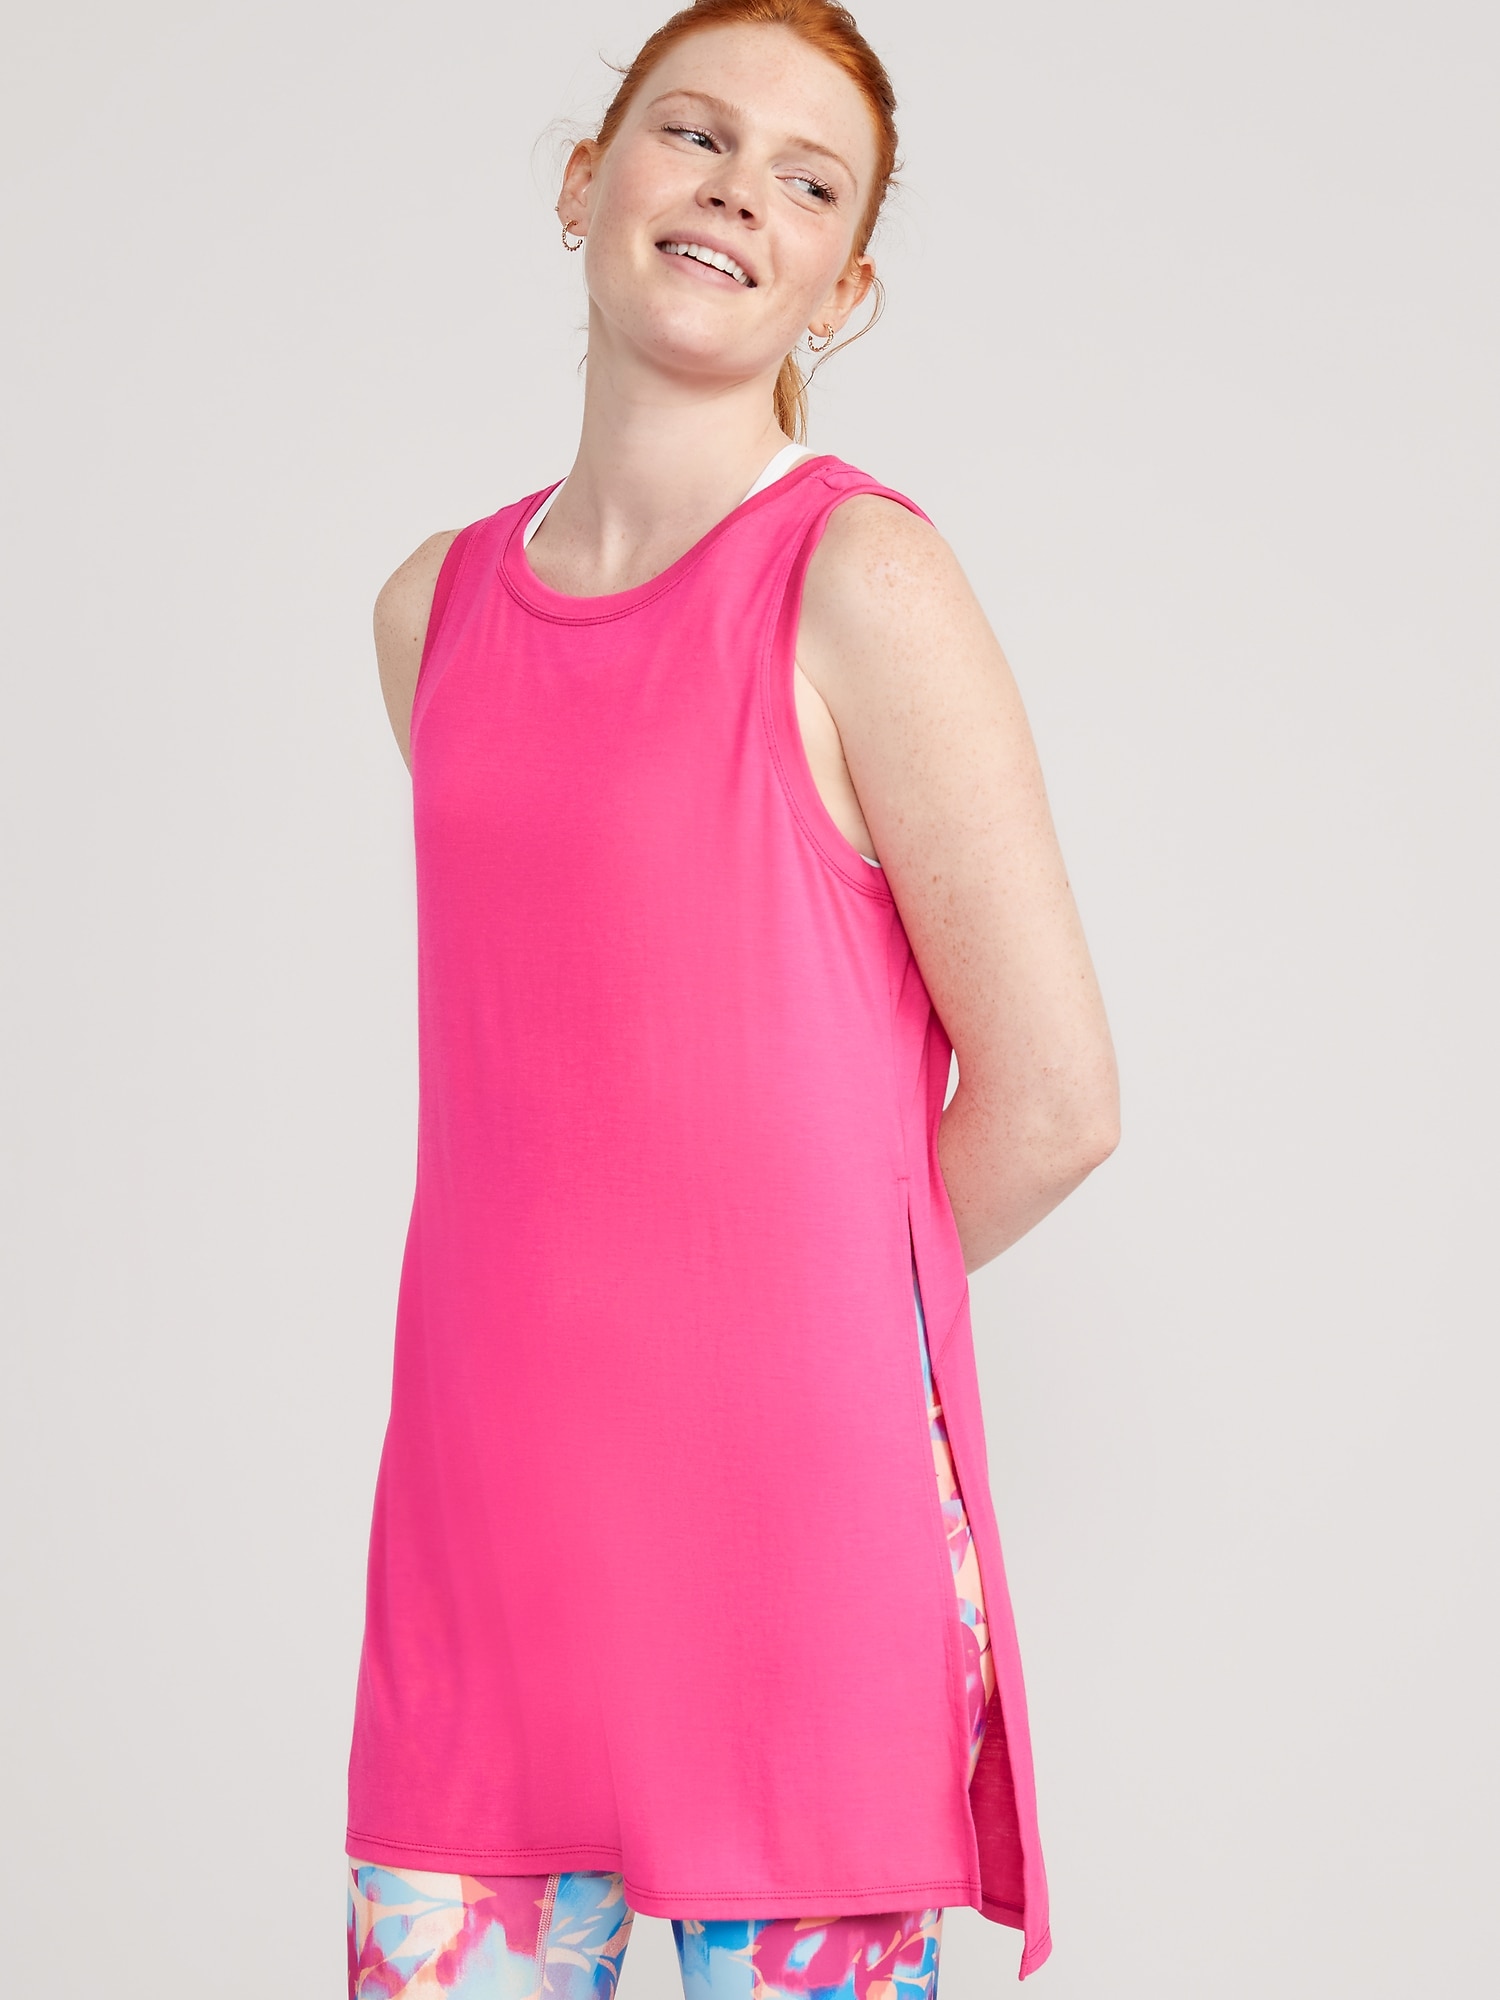 Old Navy UltraLite All-Day Sleeveless Tunic for Women pink. 1